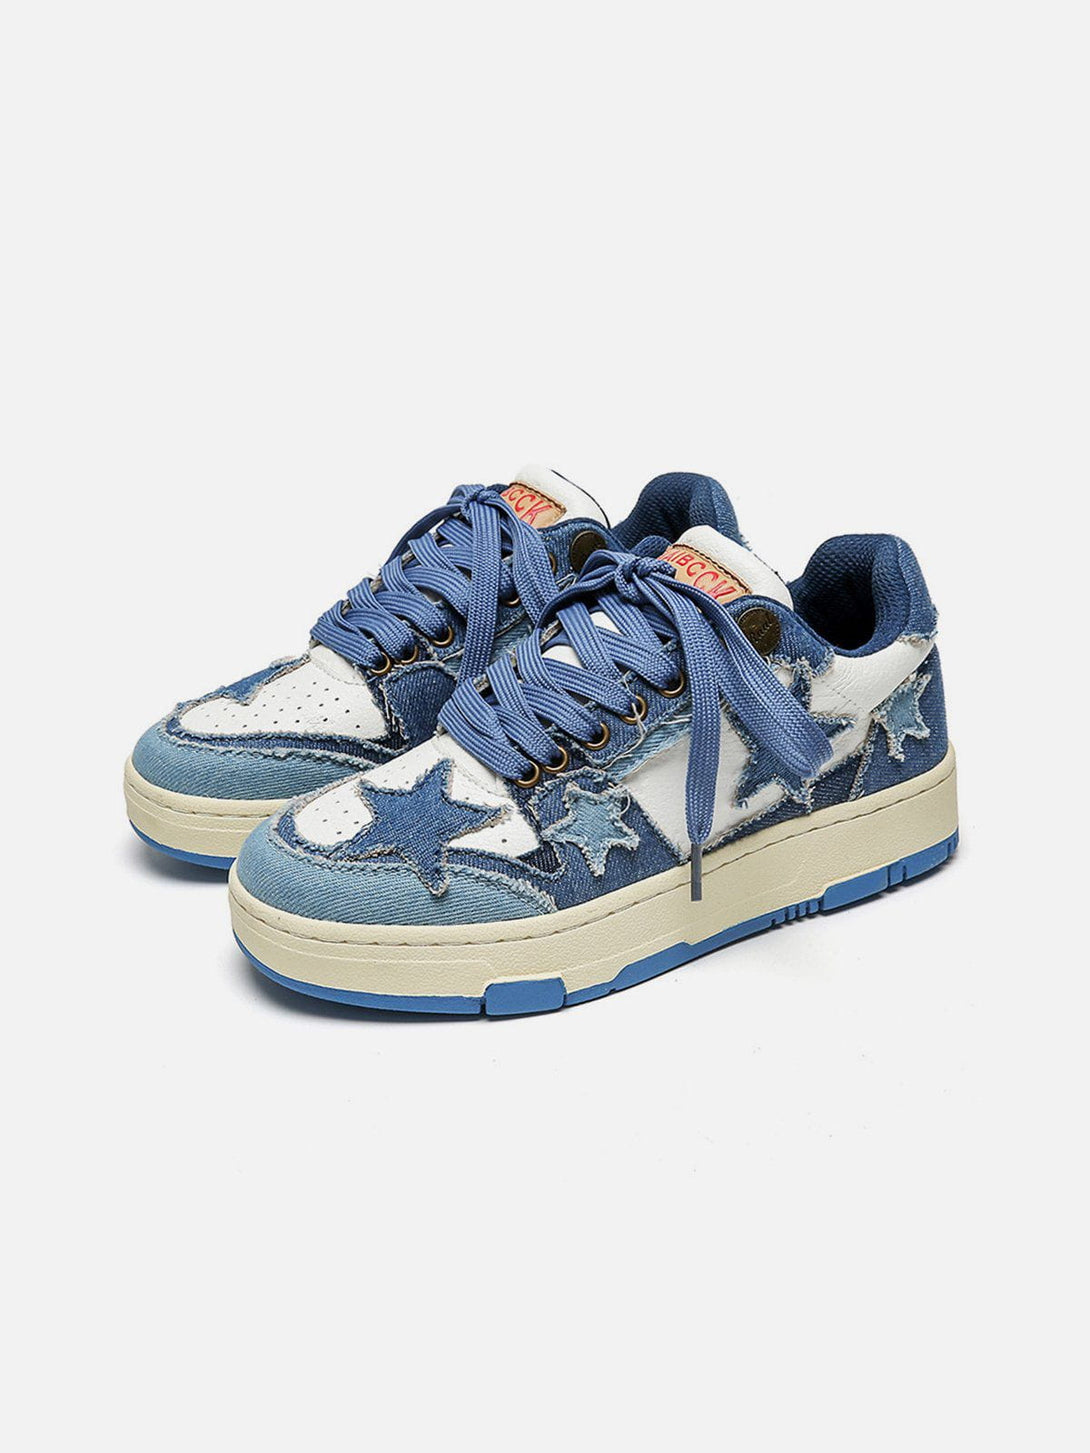 Levefly - Stars Casual All-Match Denim Skate Shoes - Streetwear Fashion - levefly.com